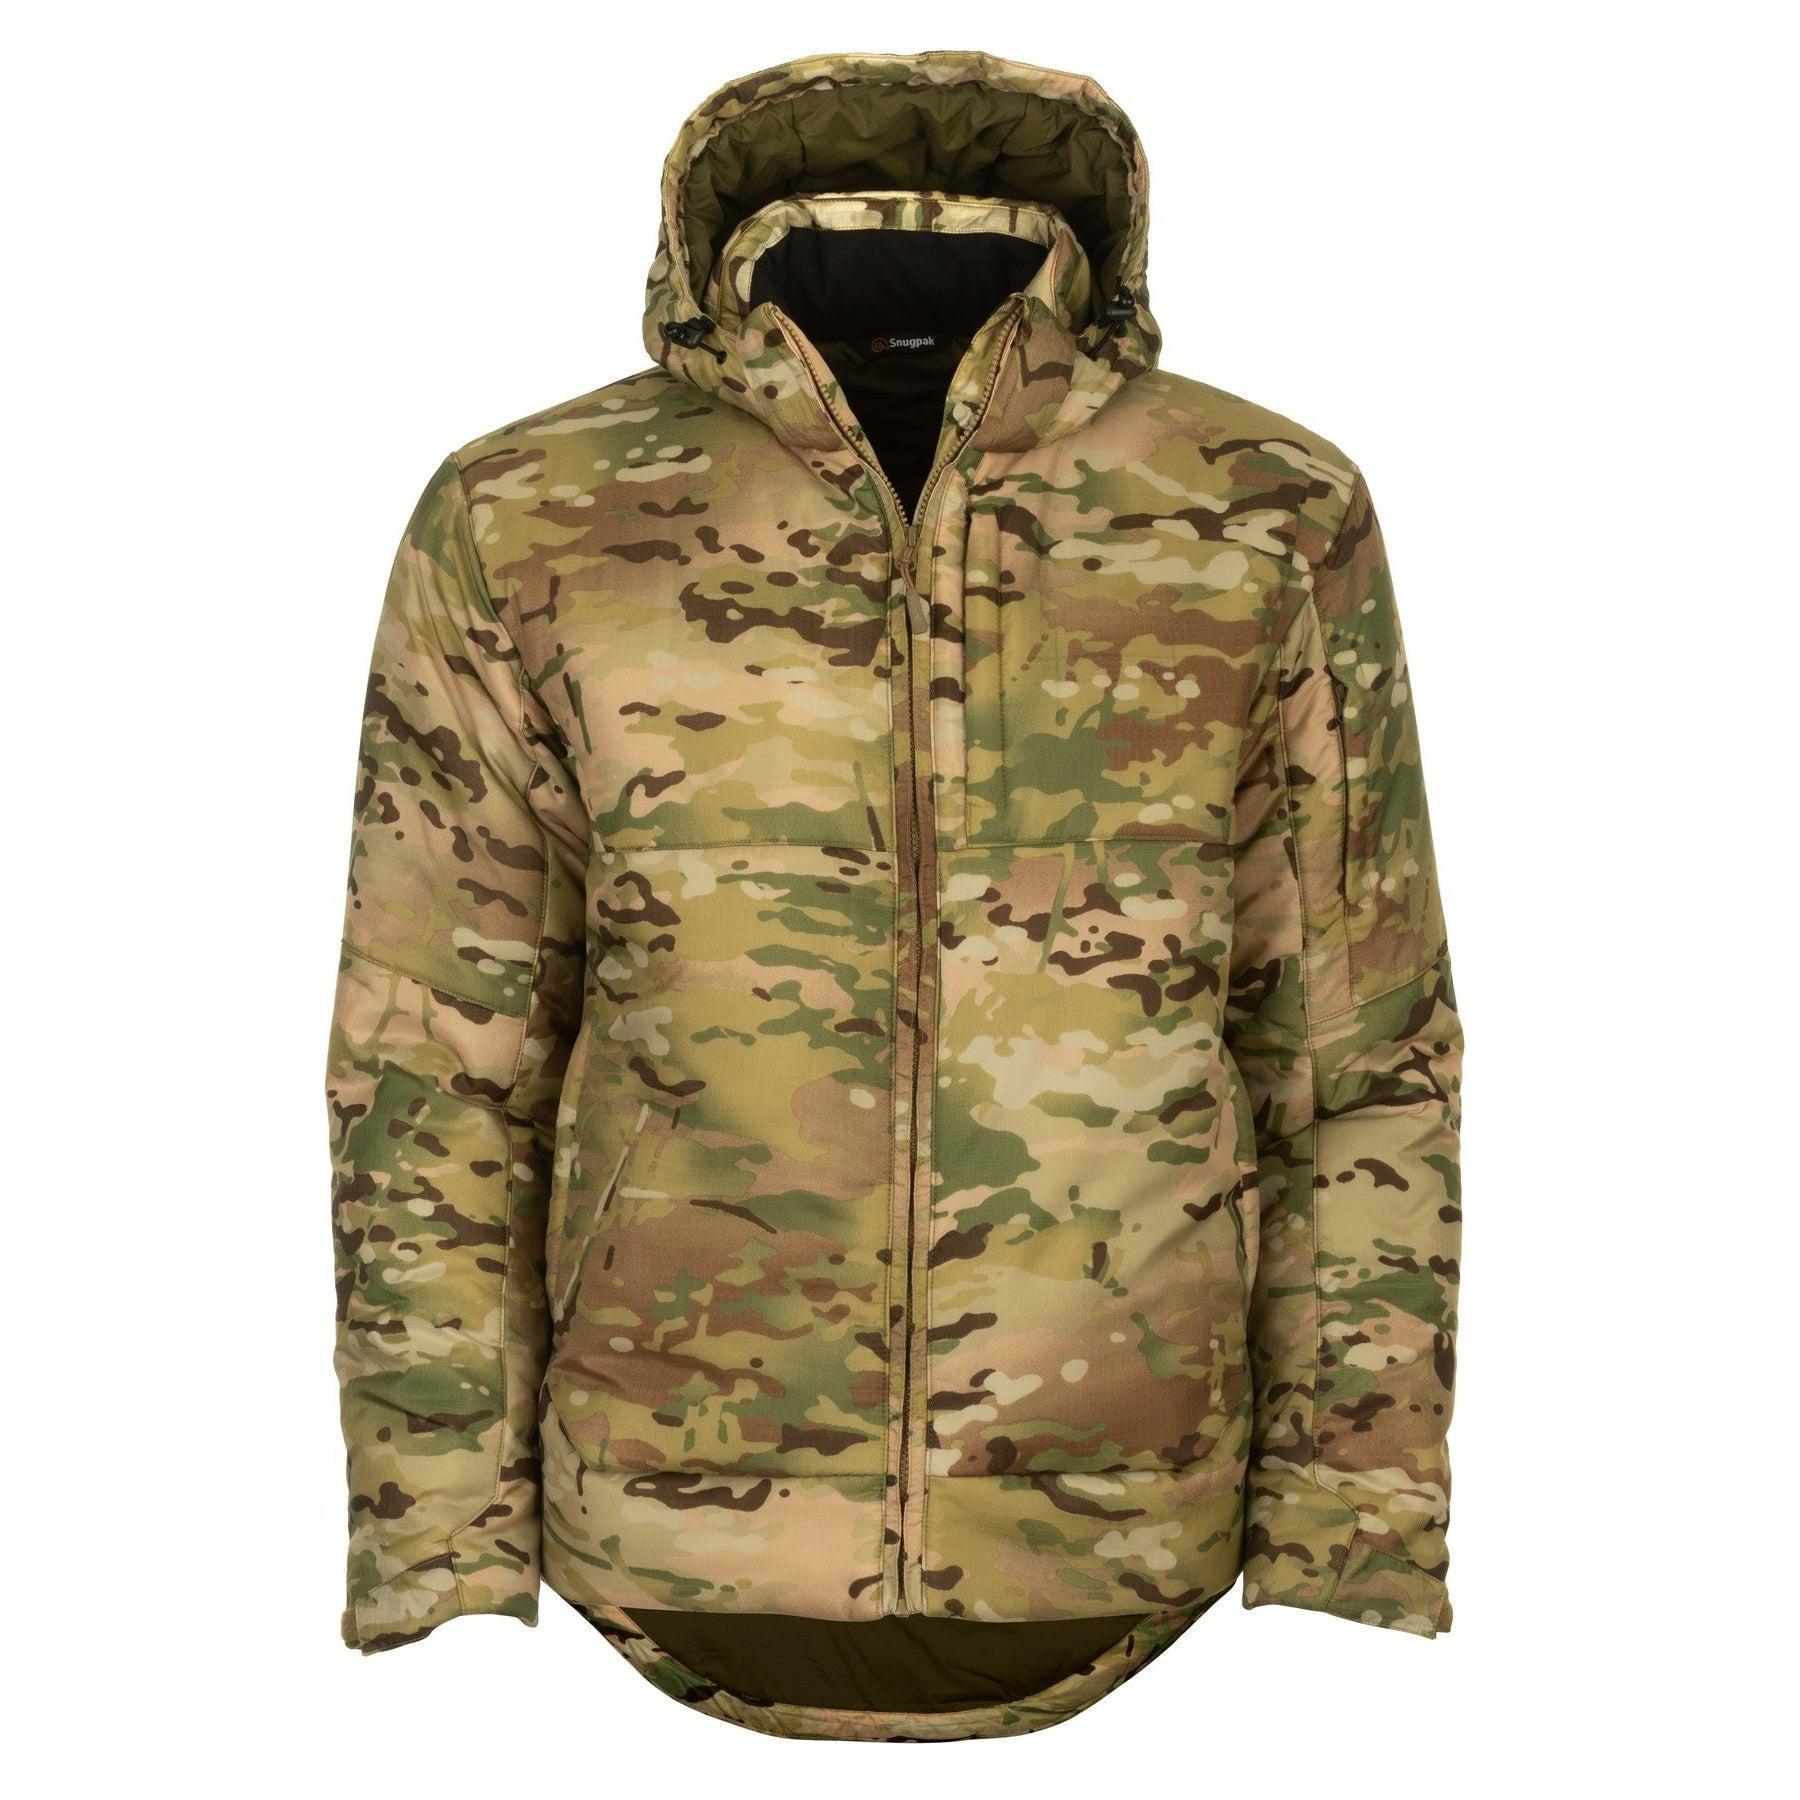 Tomahawk Cold Weather Insulated Jacket - Multicam -15°C To -20°C